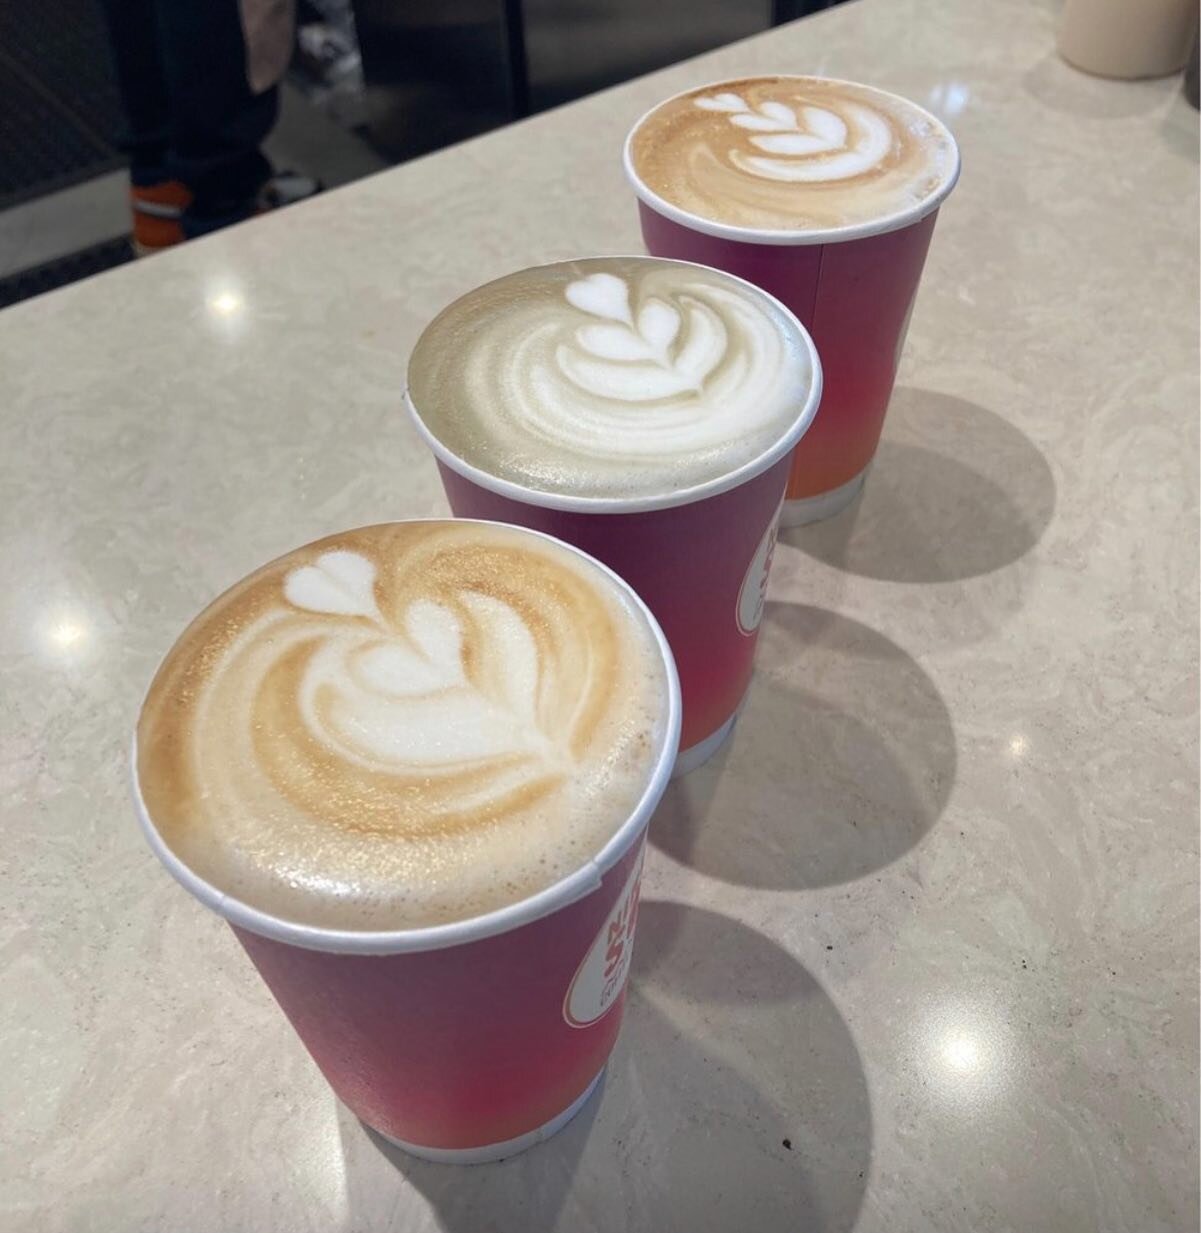 Happy FriYAY! 🫶🏾 Who needs a drink? 🙋🏾Here are some recs for the weekend:

☕️ Celebration Latte
🍵 Nirvana Peach Tea
🧇 Golden Waffle
🍵 Rose Chai
☕️ Chagaccino Latte (while supplies last)

Have a fantastic day! 💕

&mdash;
📸: Ari N. on Yelp